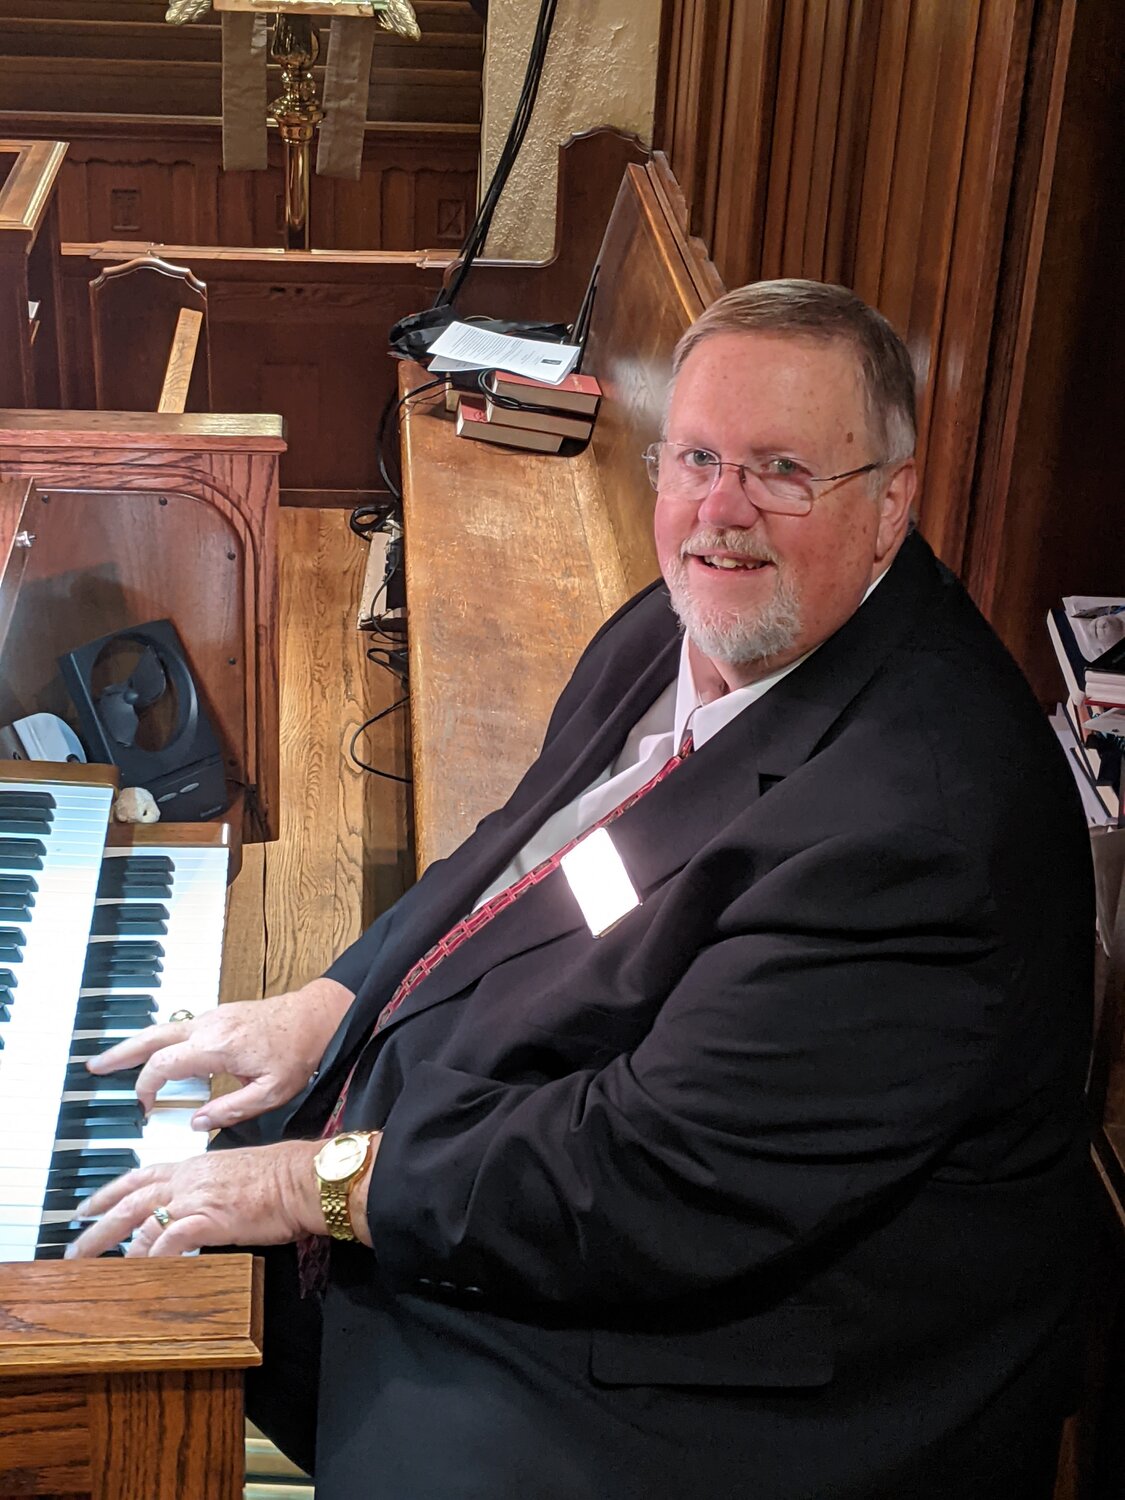 Choirmaster, composer and church organist Ken Dyer is celebrating 25 years with the Church of the Ascension, on North Village Avenue.